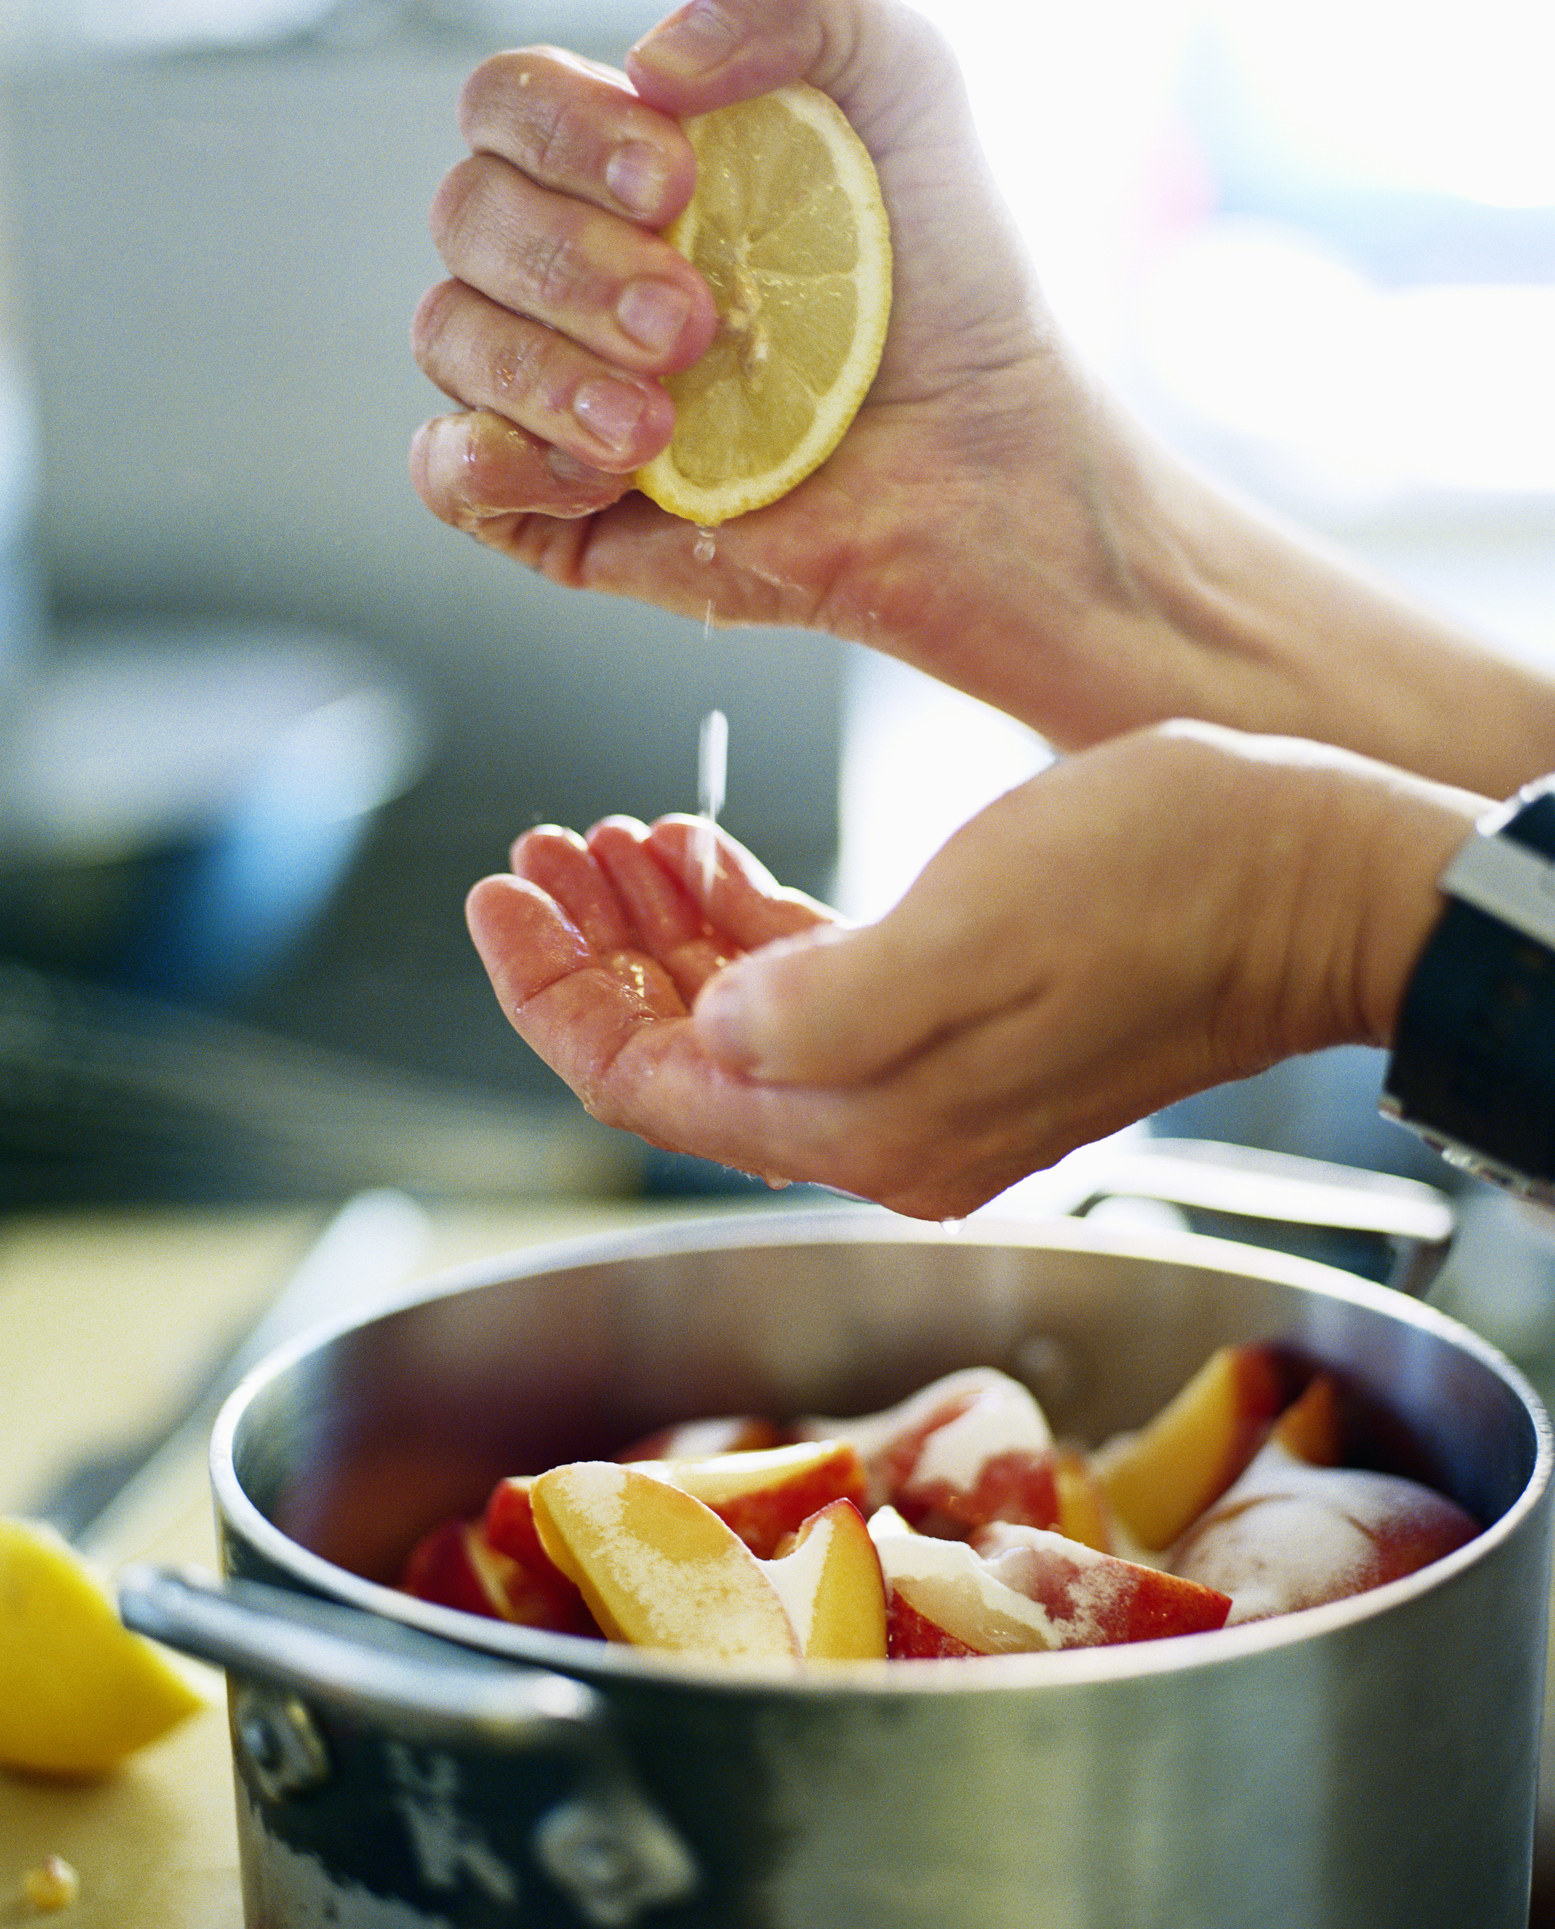 Someone squeezing a lemon into a pot of peaches.